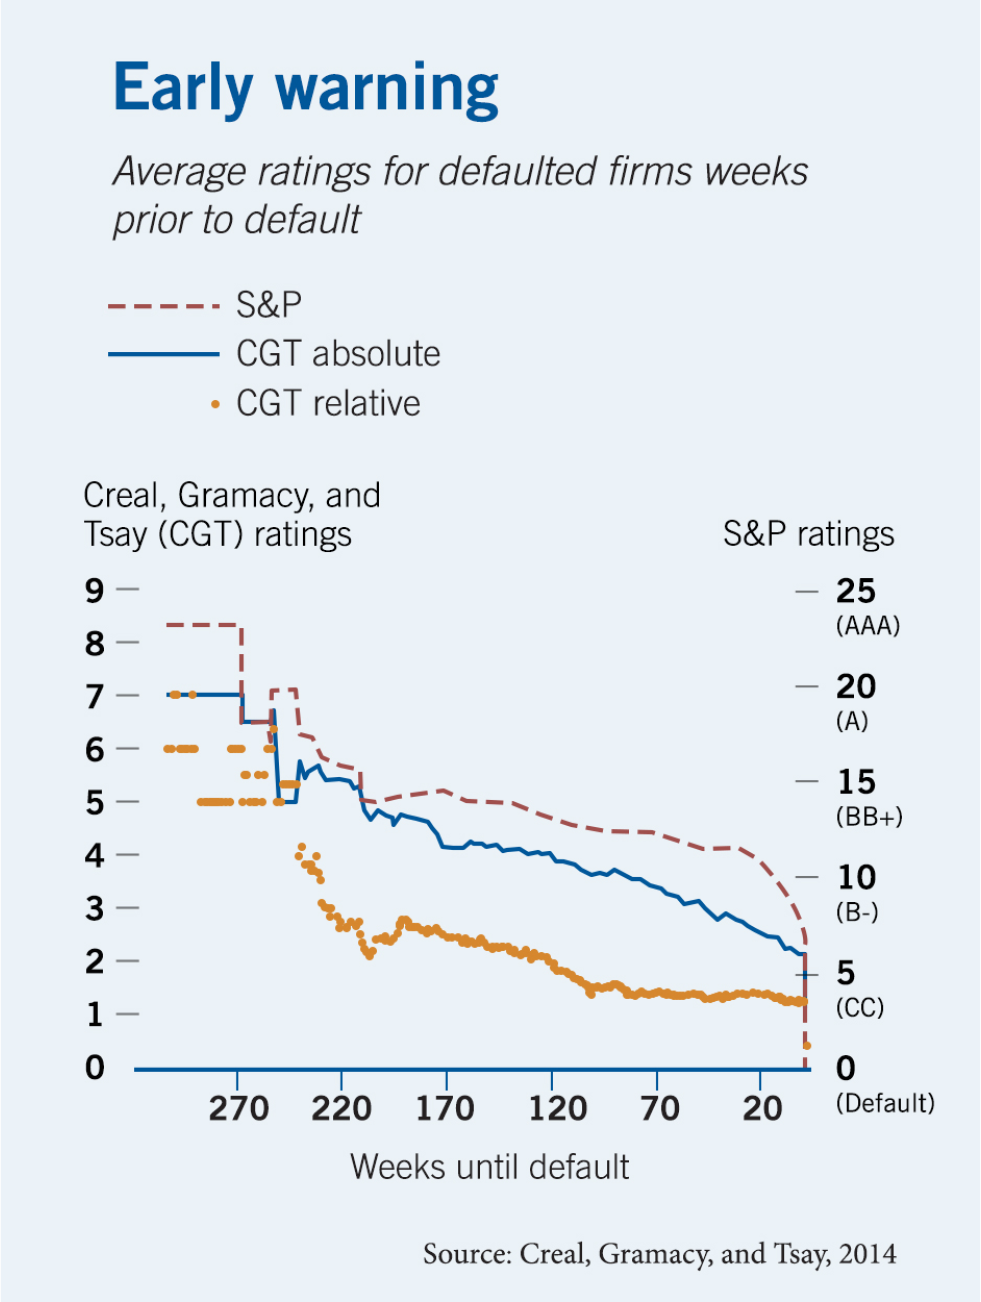 A line chart plotting average credit ratings for defaulting companies, with values from high to low on the y-axis and the descending number of weeks until default on the x-axis. One line tracks S and P ratings, and two other lines track absolute and relative Creal, Gramacy, and Tsay ratings. The lines all move downward from left to right, with the CGT relative ratings dropping to troubling levels at least one hundred twenty weeks before default.